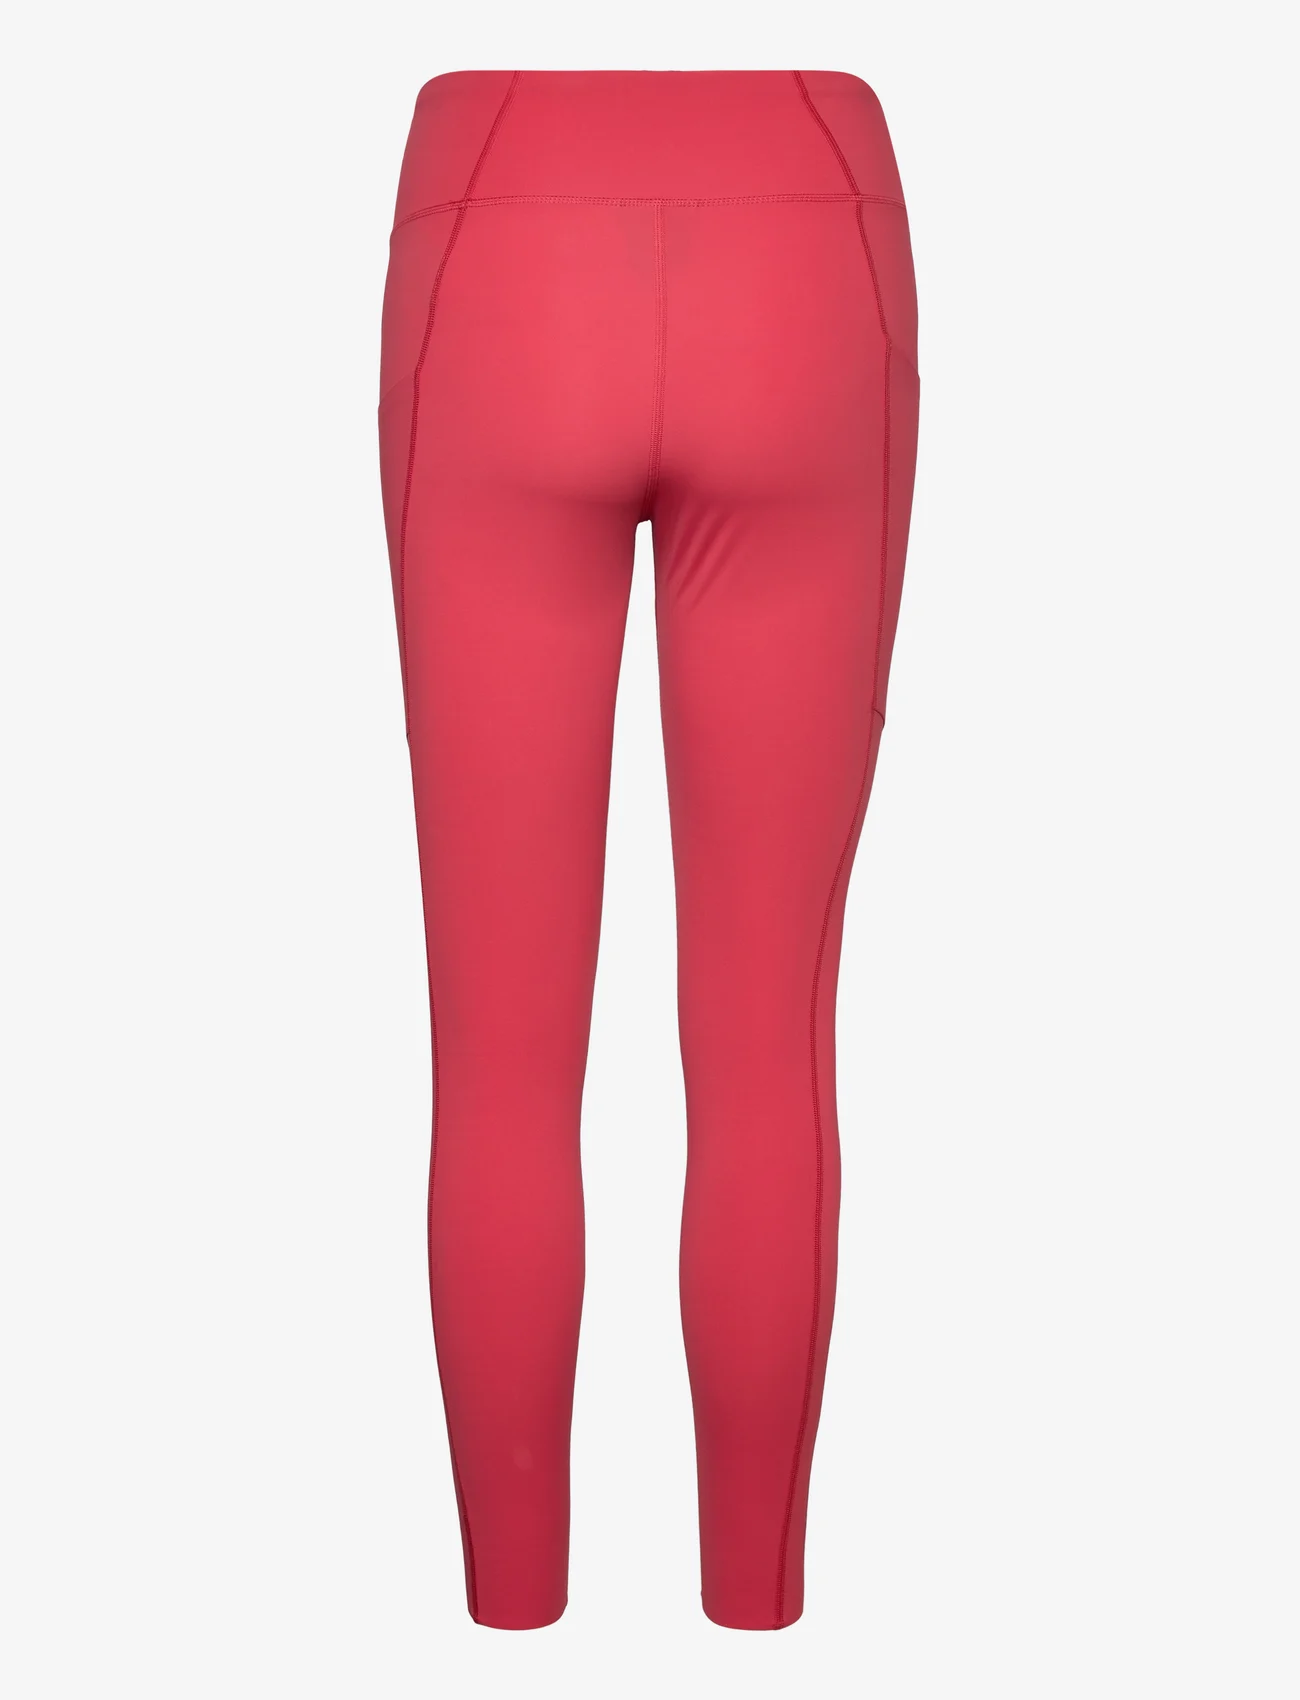 Peak Performance - W Power Tights-SOFTER RED - sportleggings - softer red - 1